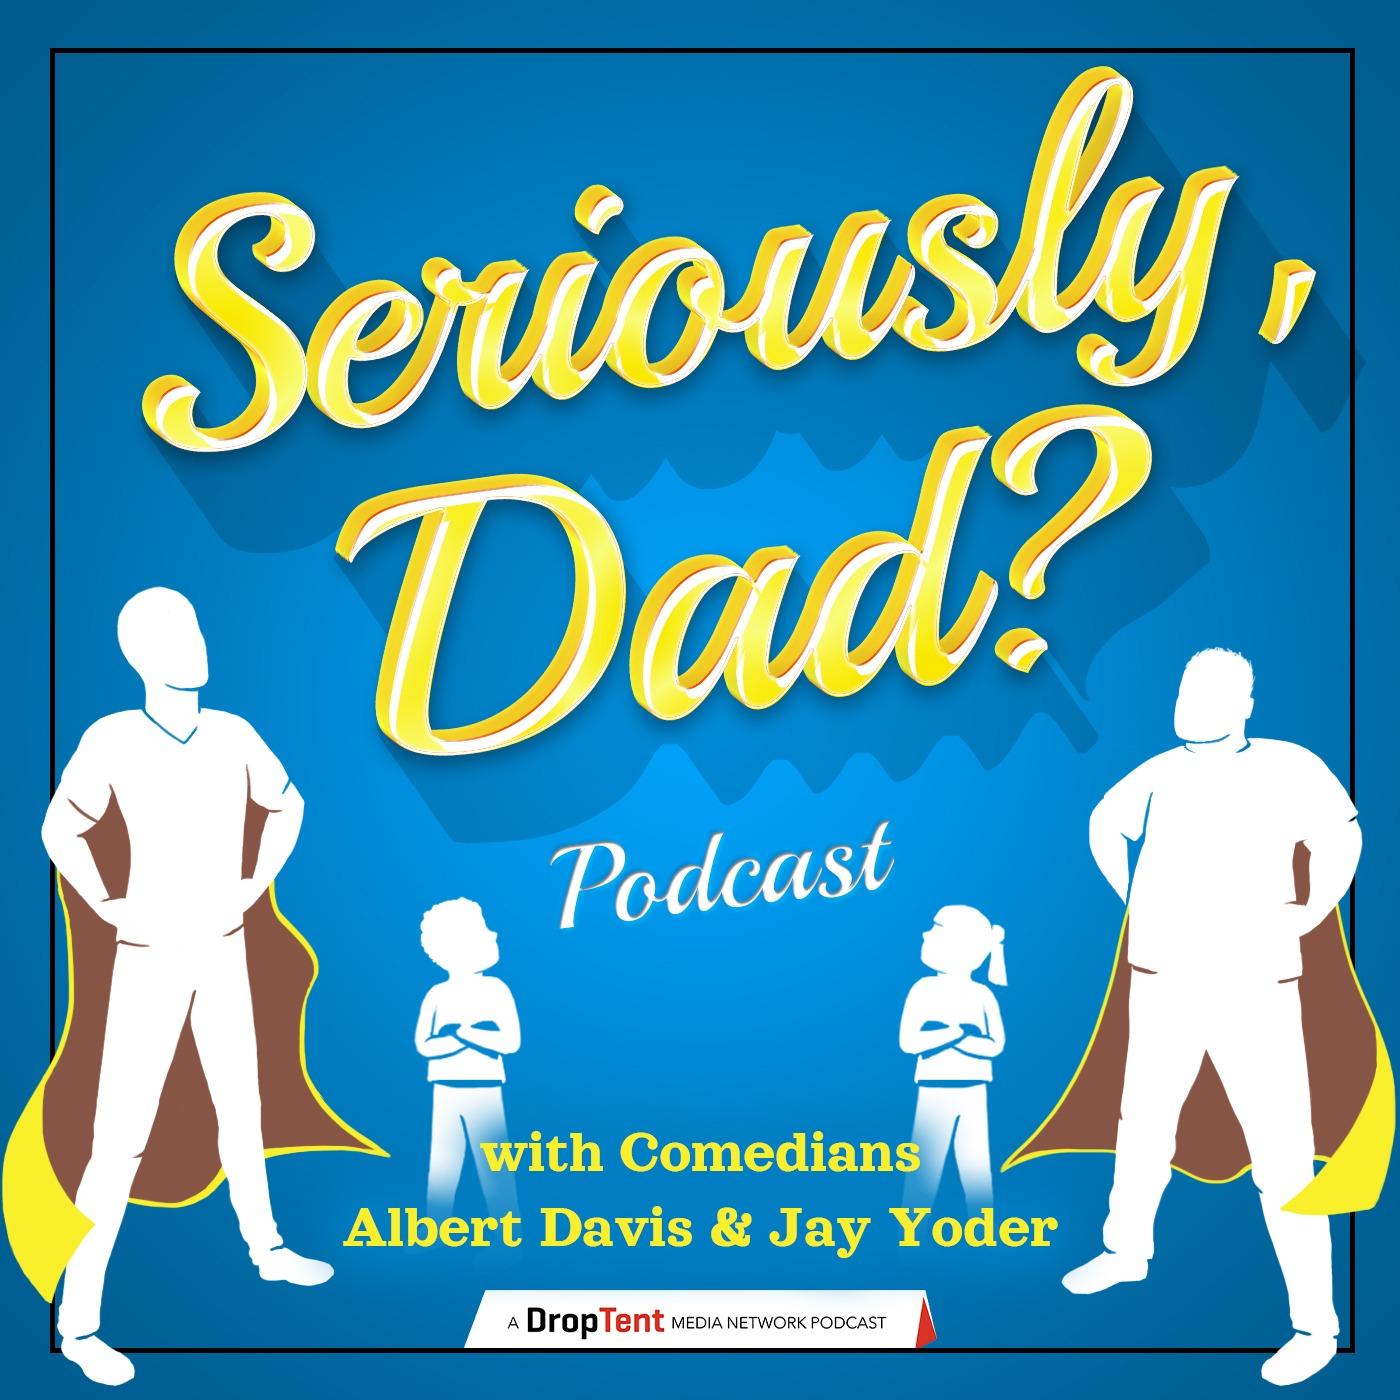 Seriously, Dad? Podcast